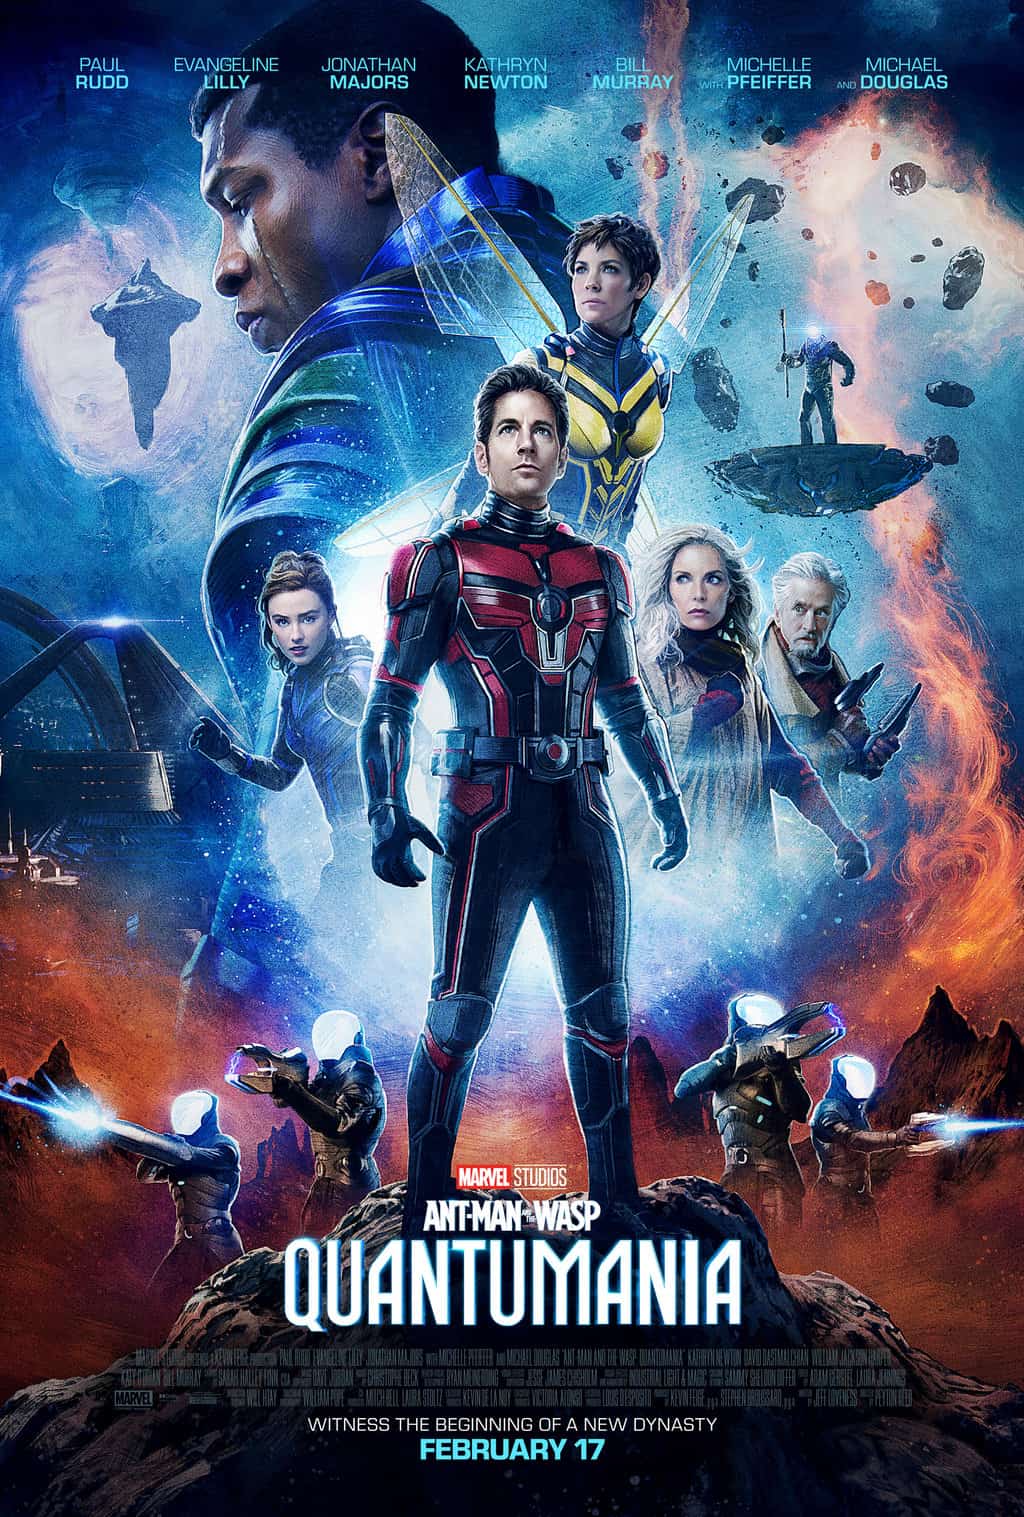 when can you pee during ANT-MAN AND THE WASP: QUANTUMANIA? Movie Poster.